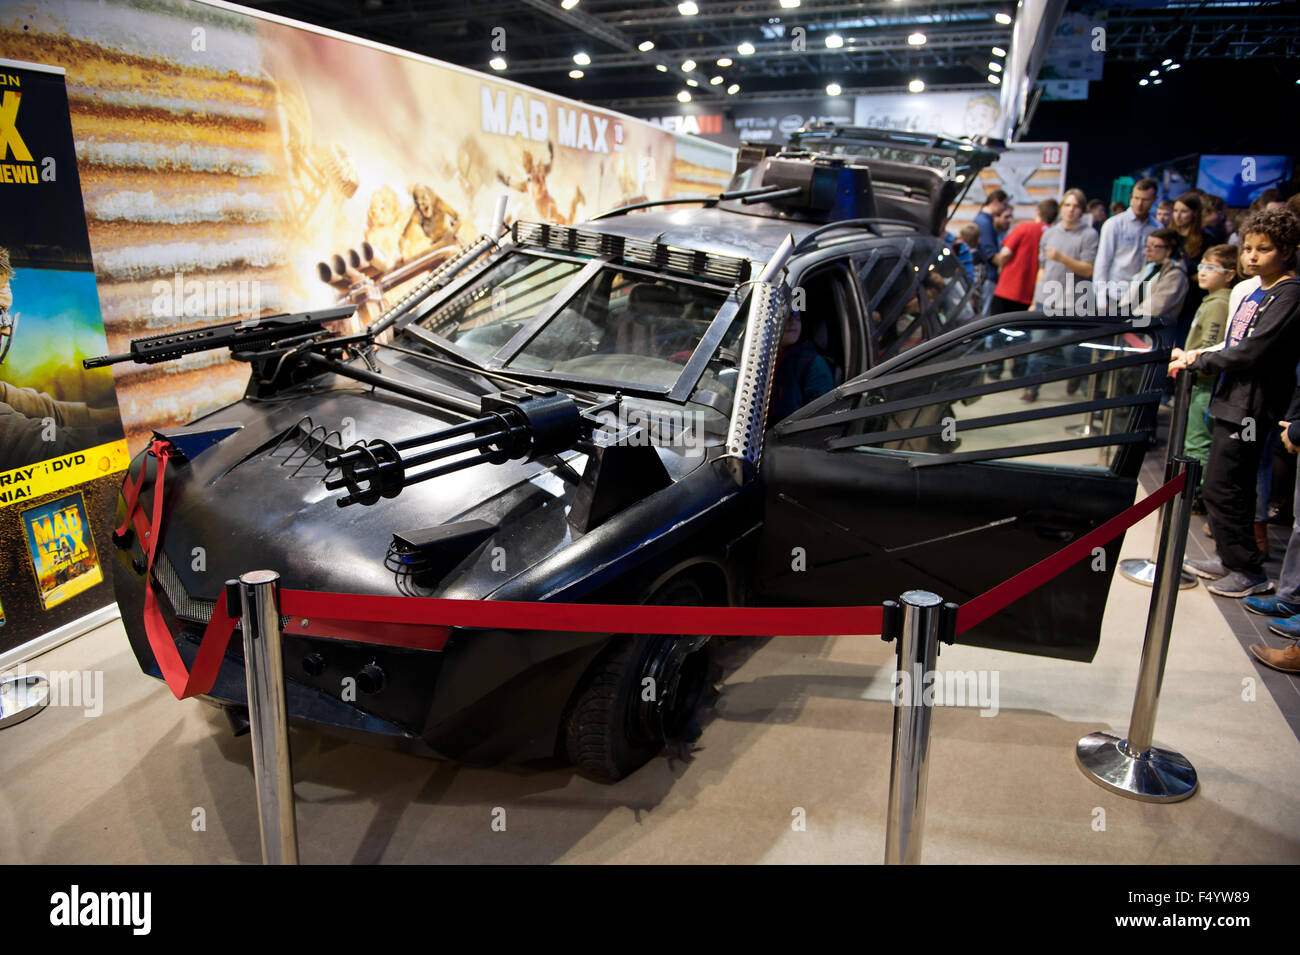 Warsaw, Poland. 24th Oct, 2015. Trade fair show Mad Max car at games expo, Warsaw Games Week, Targi Gier Wideo, Hala Expo XXI, Warsaw, Poland, October 24, 2015, horizontal orientation, rights managed, editorial use only. Credit:  Arletta Cwalina/Alamy Live News Stock Photo